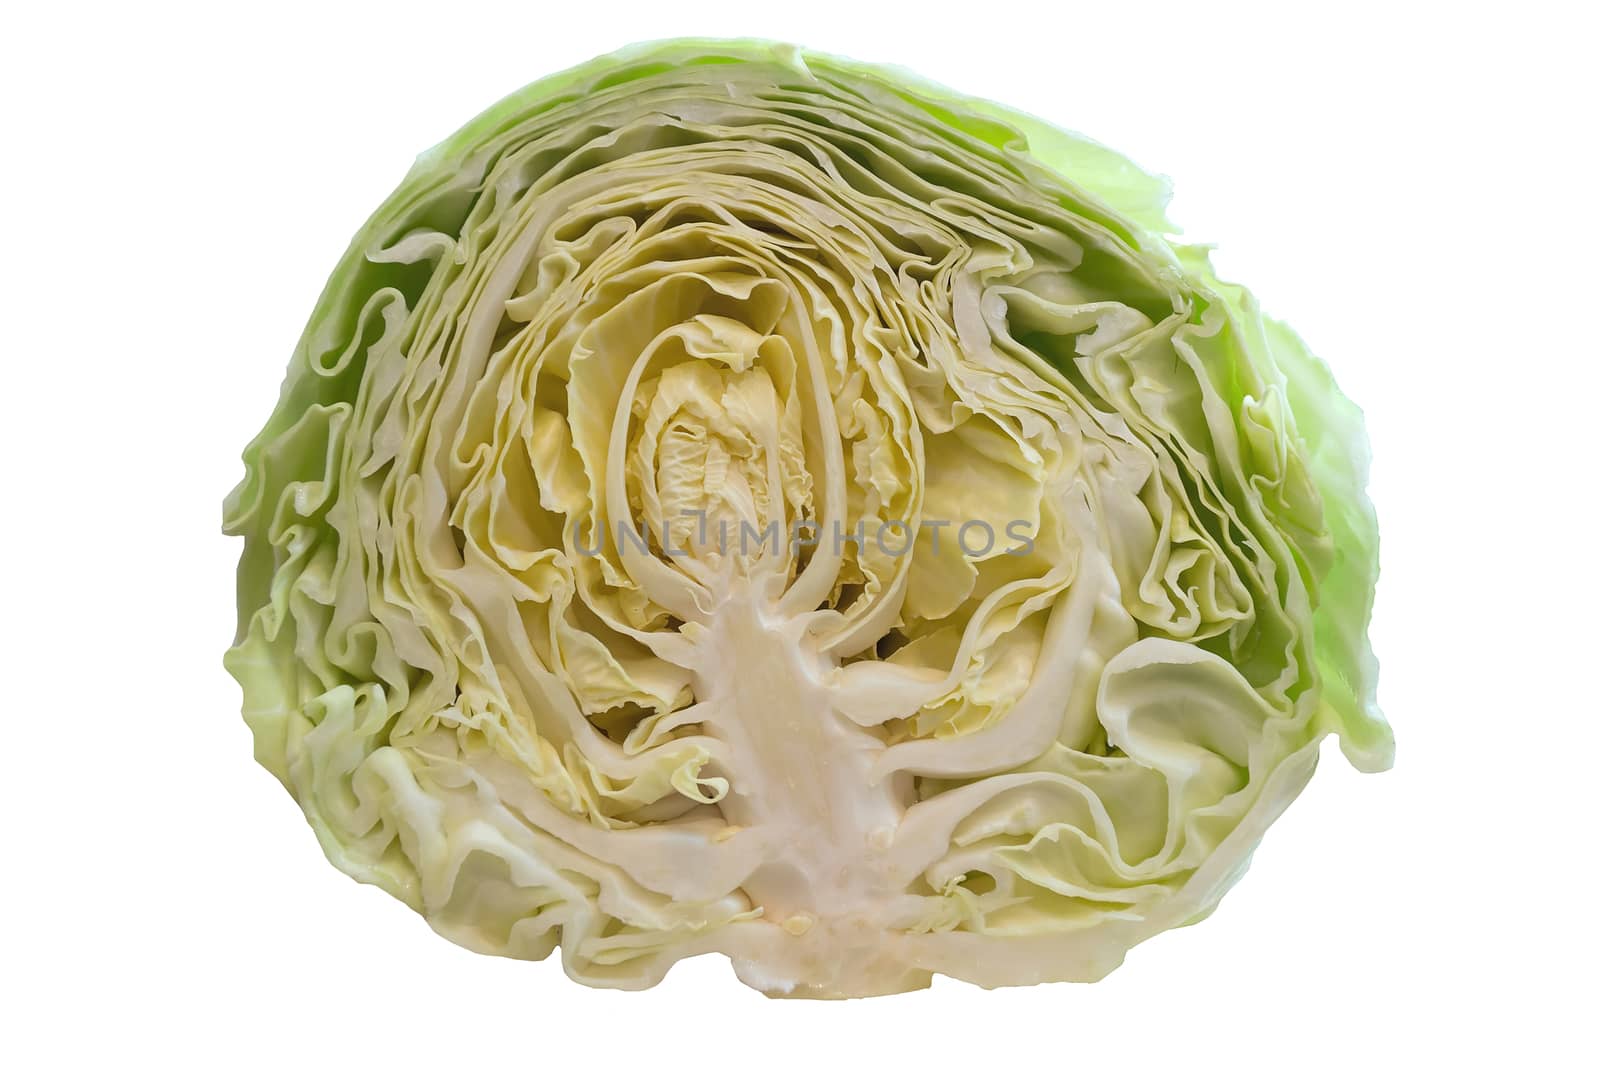 Cross Section of Cut Cabbage Head by jpldesigns